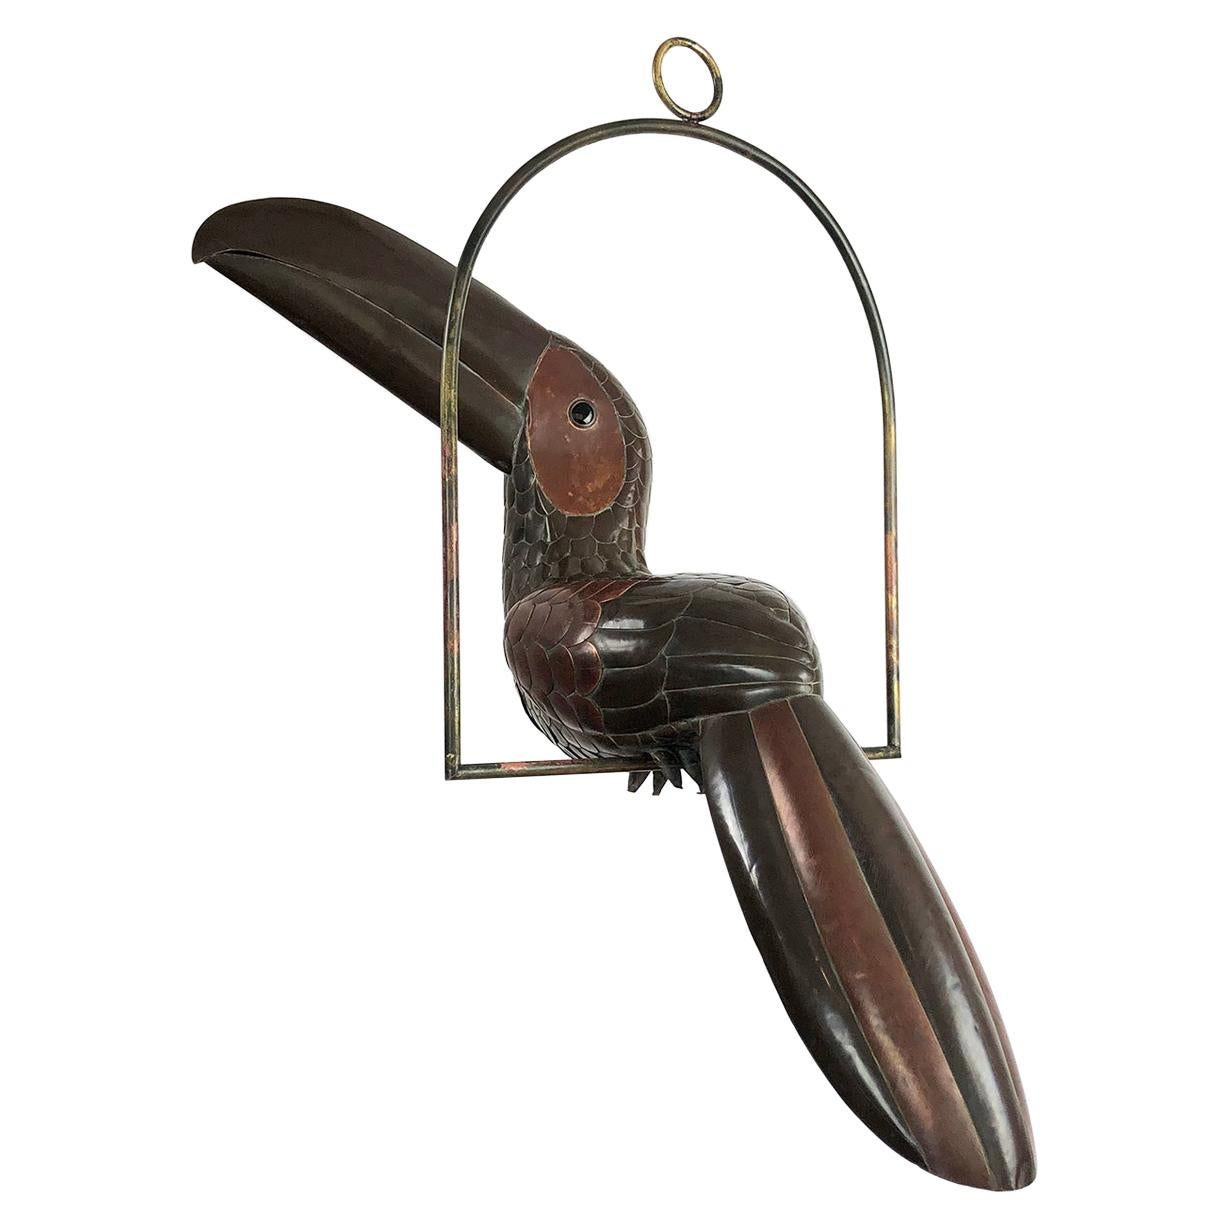 Big Size Sergio Bustamante Sculpture of Toucan on Hanging Perch